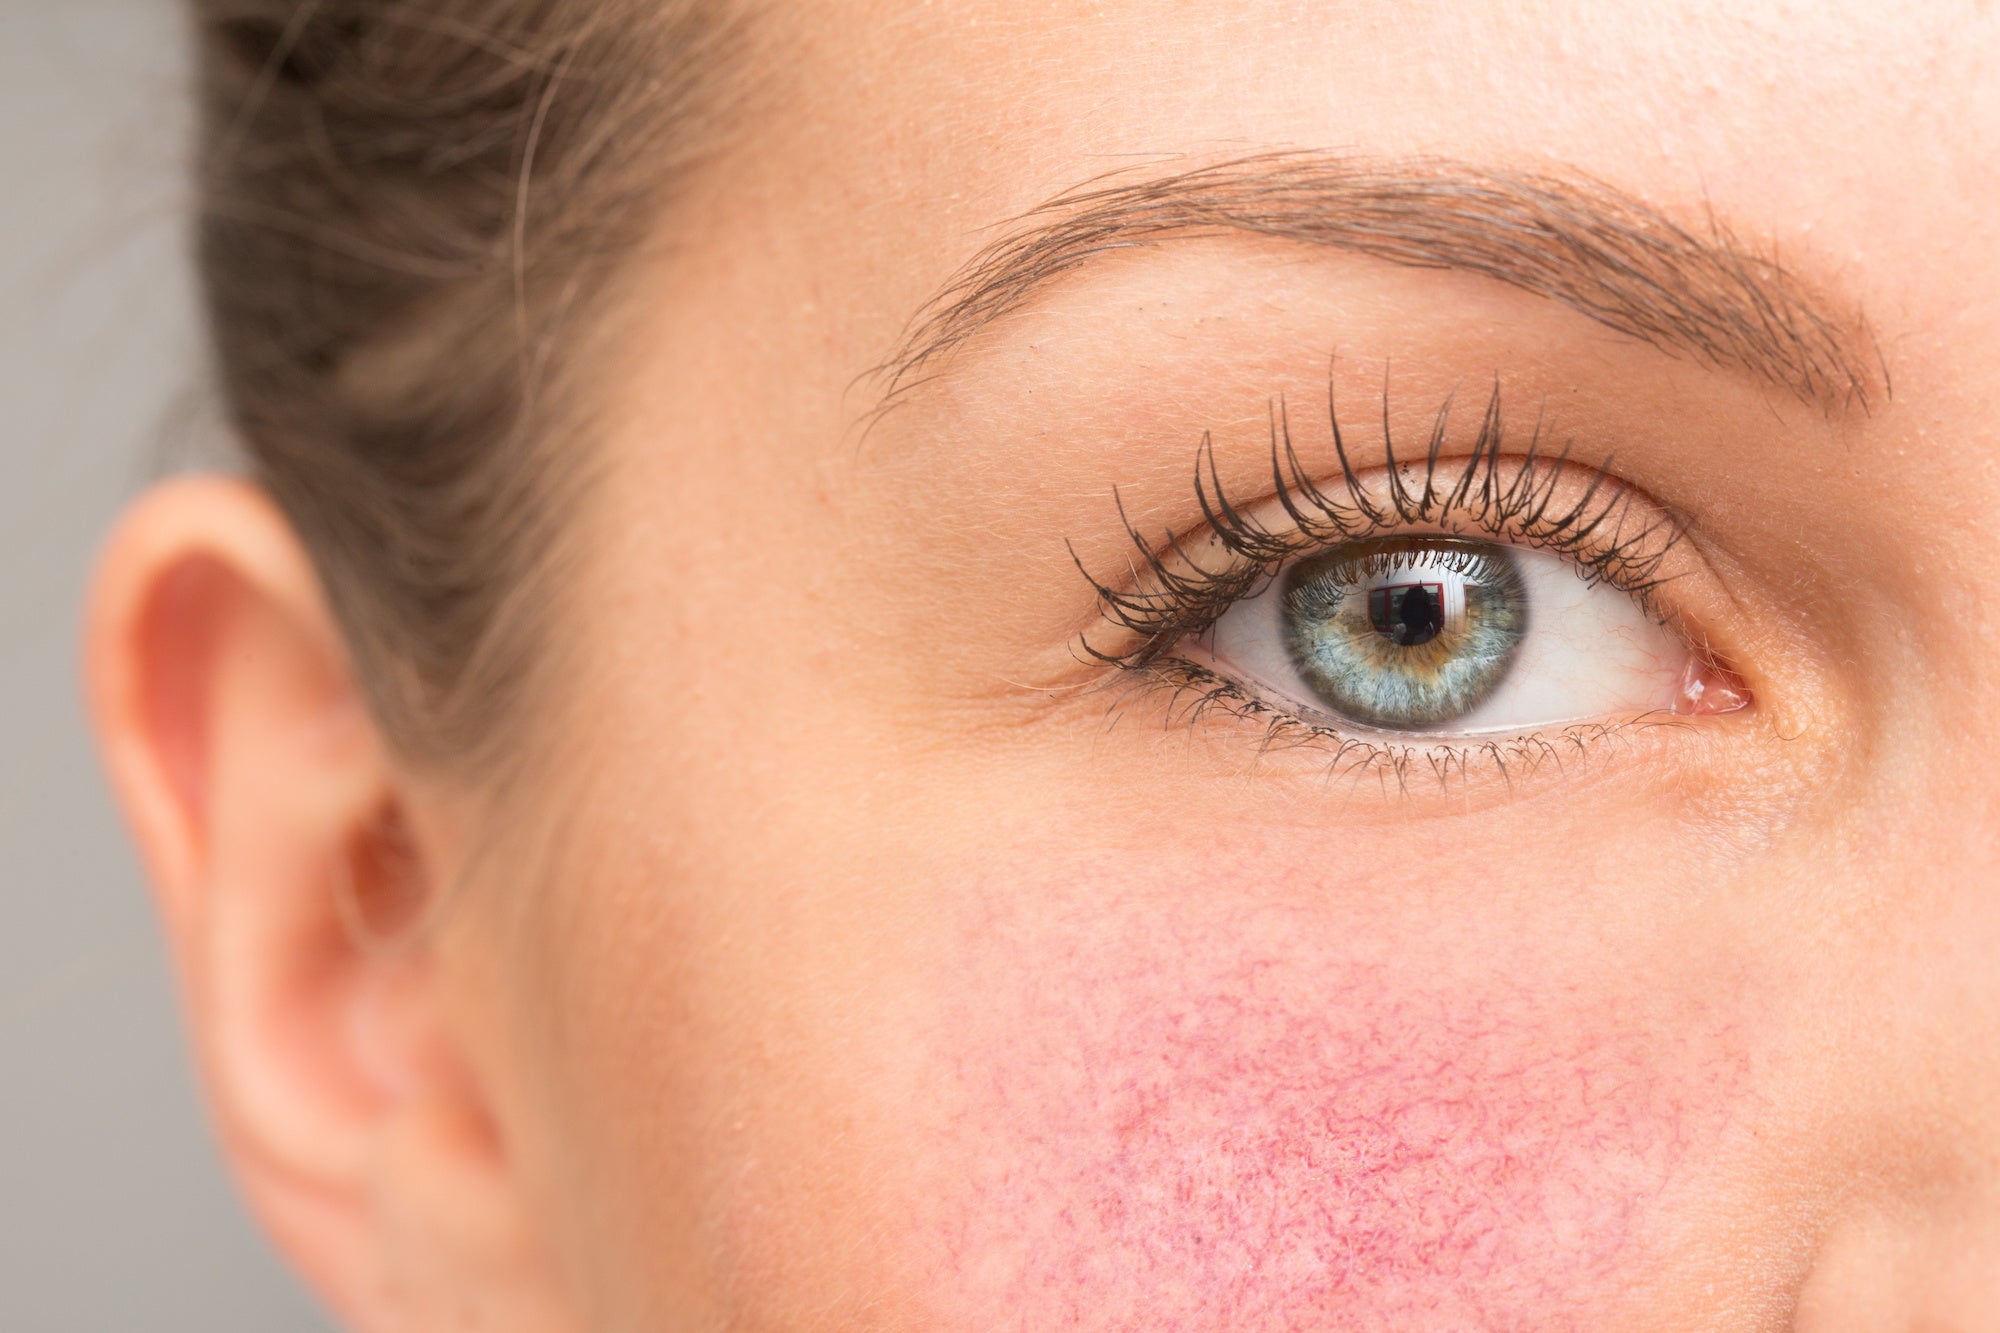 Rosacea: Symptoms, Causes, and Treatment